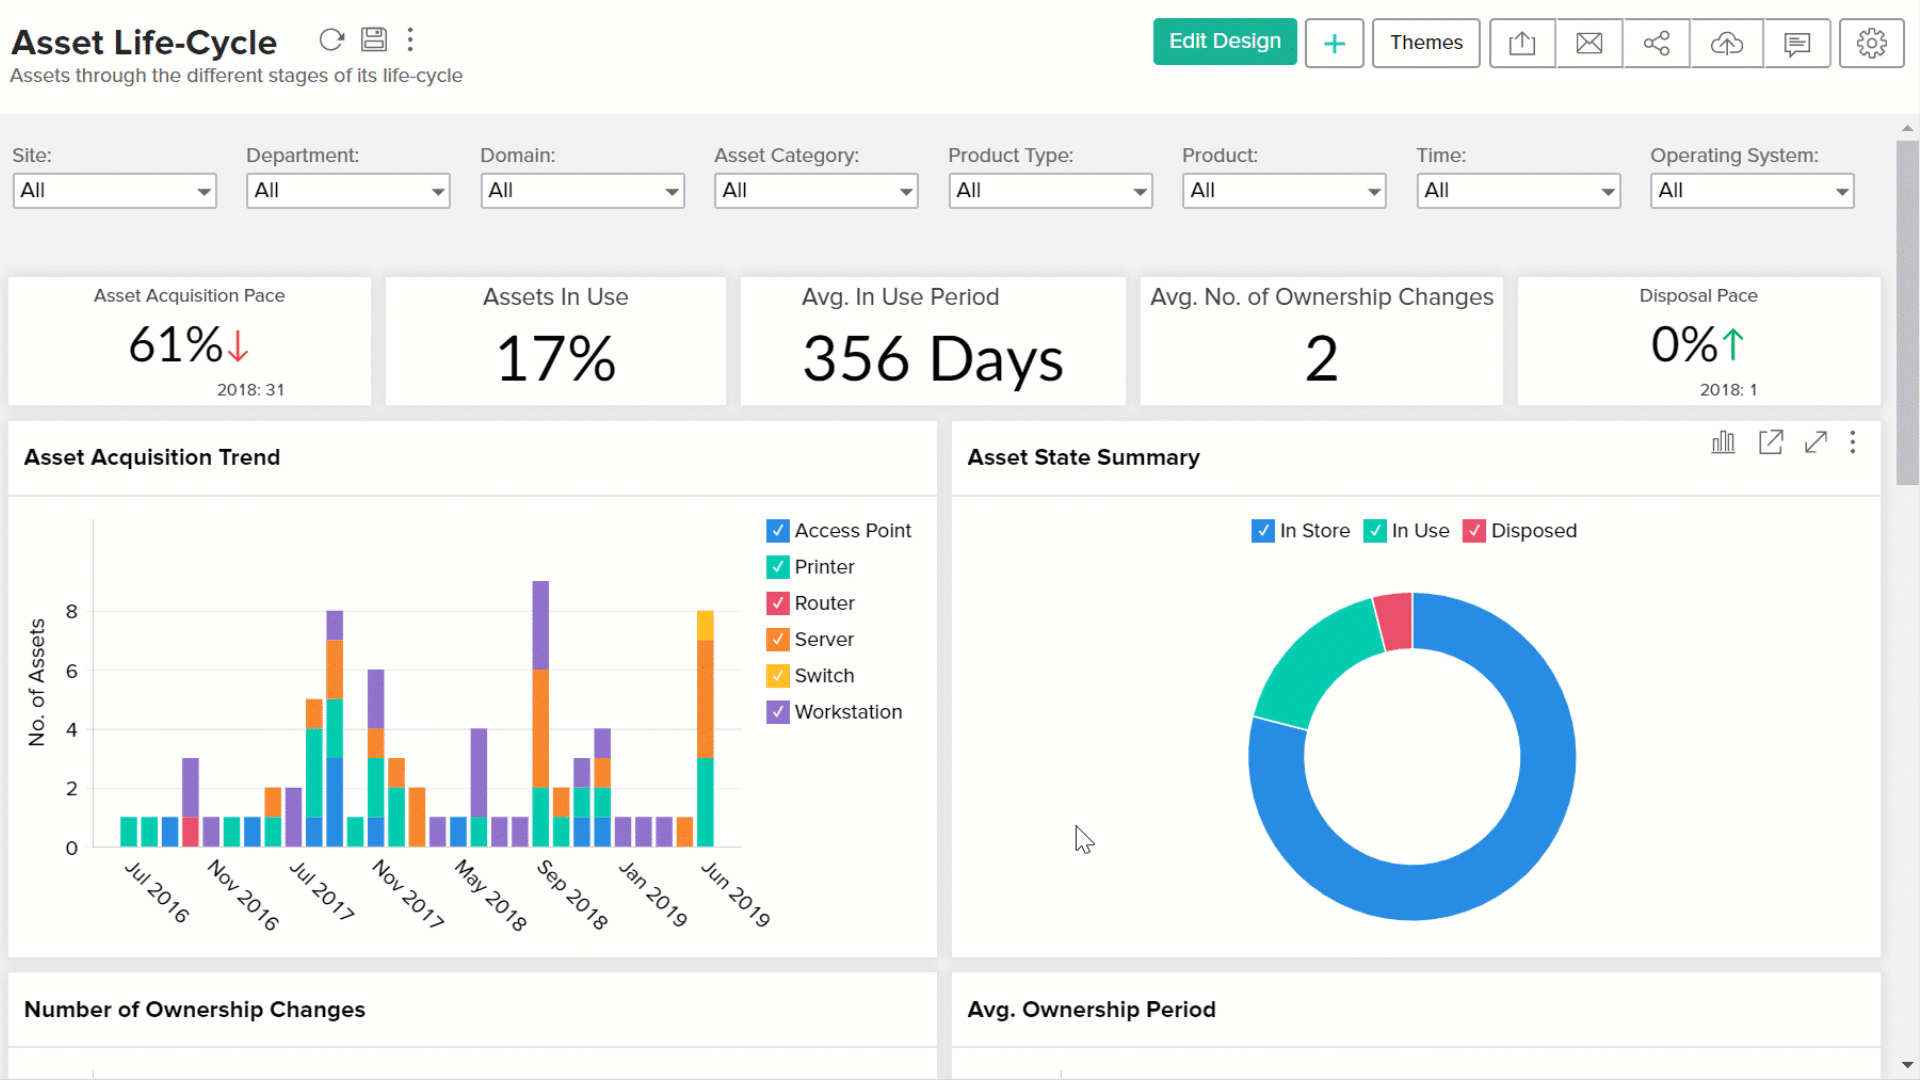 how to create a report in zoho analytics